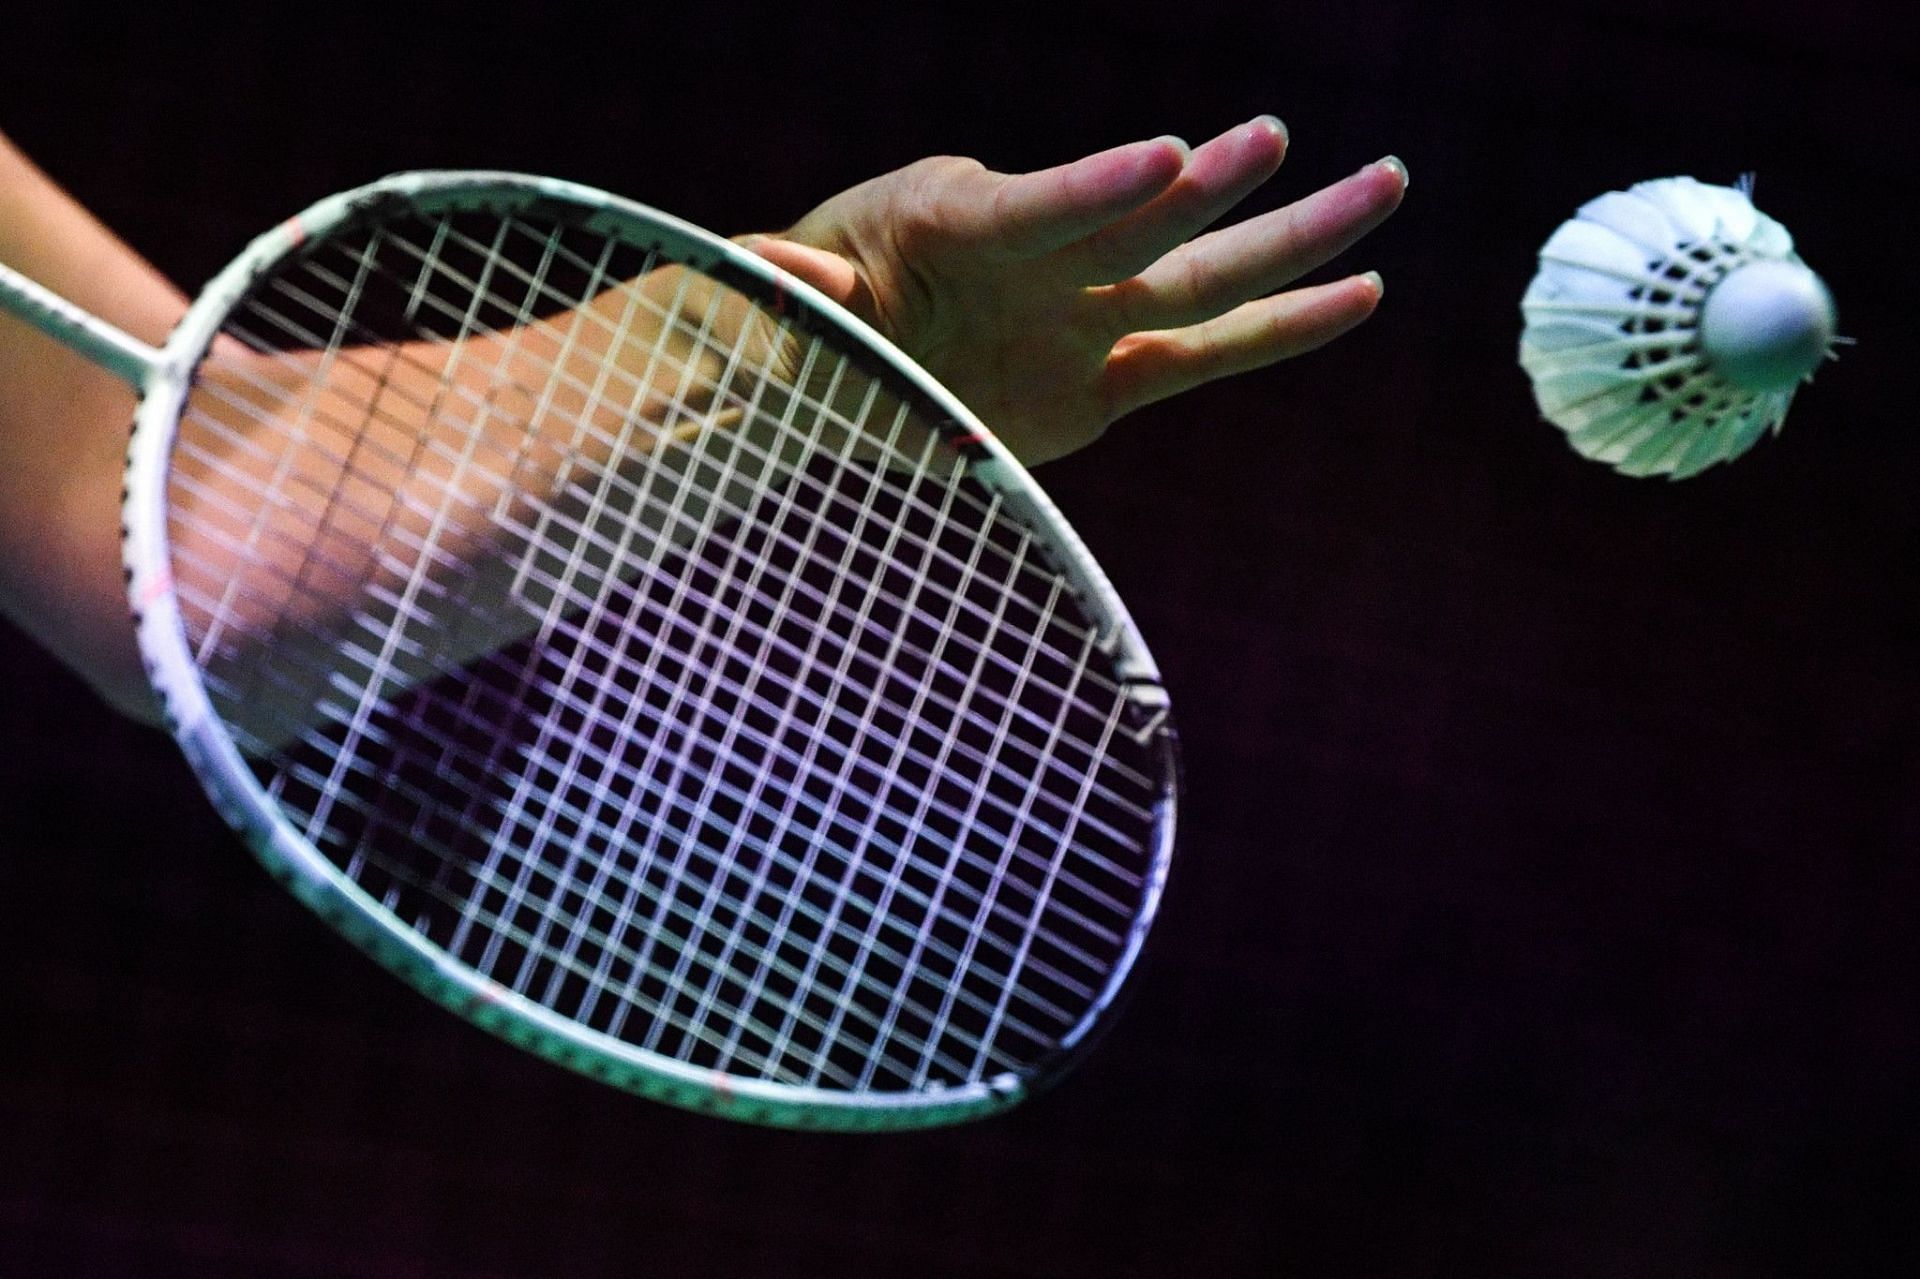 India will host badminton world championship 2026 | Official statements